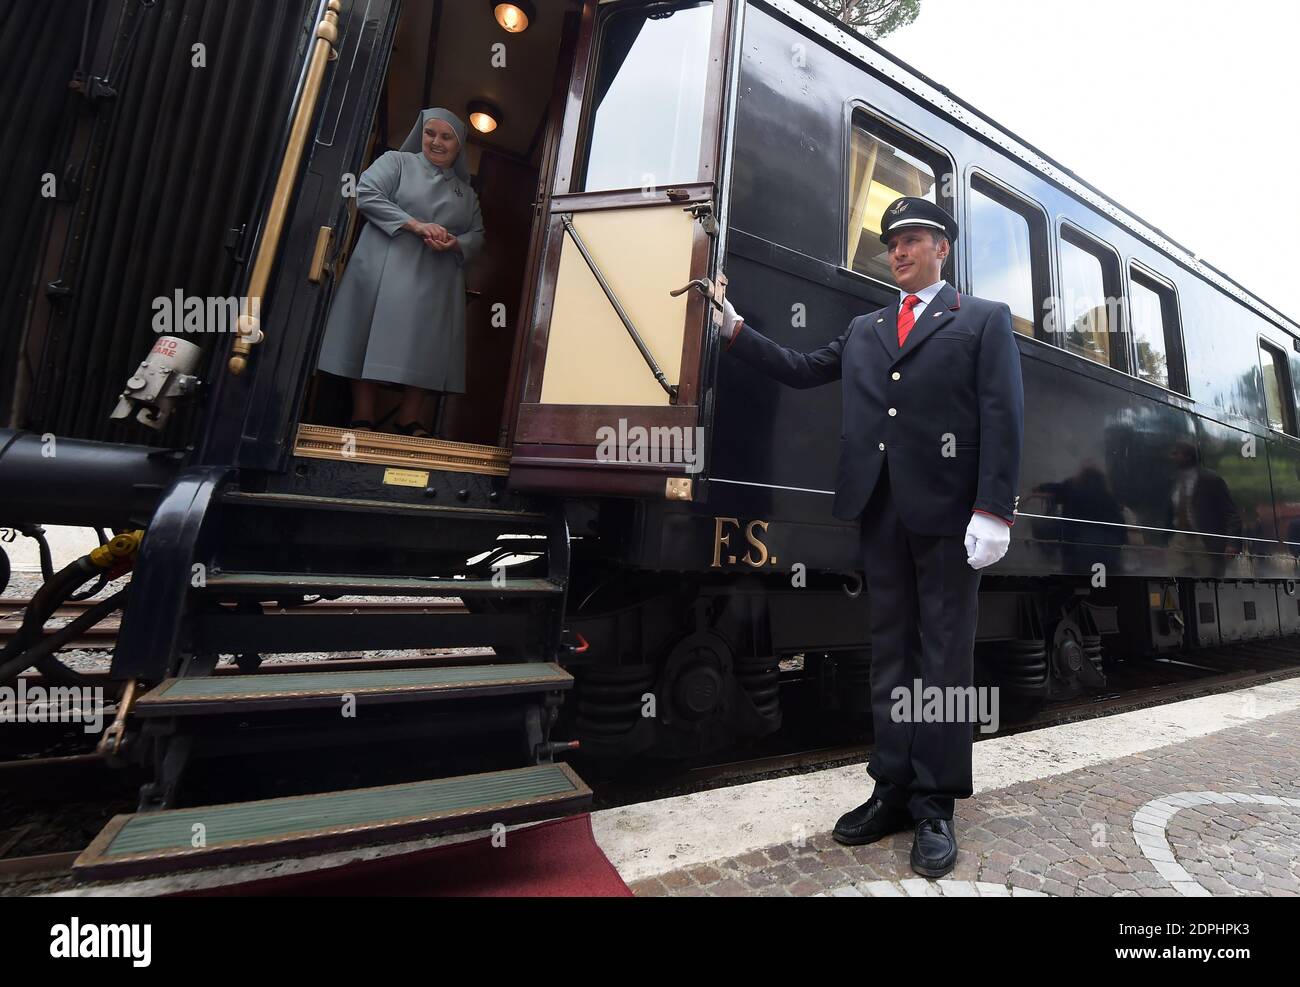 An antique train departed from the Vatican railway station on September 11,  2015 to inaugurate a weekly service to the papal summer estate in Castel  Gandolfo, which Pope Francis has opened to